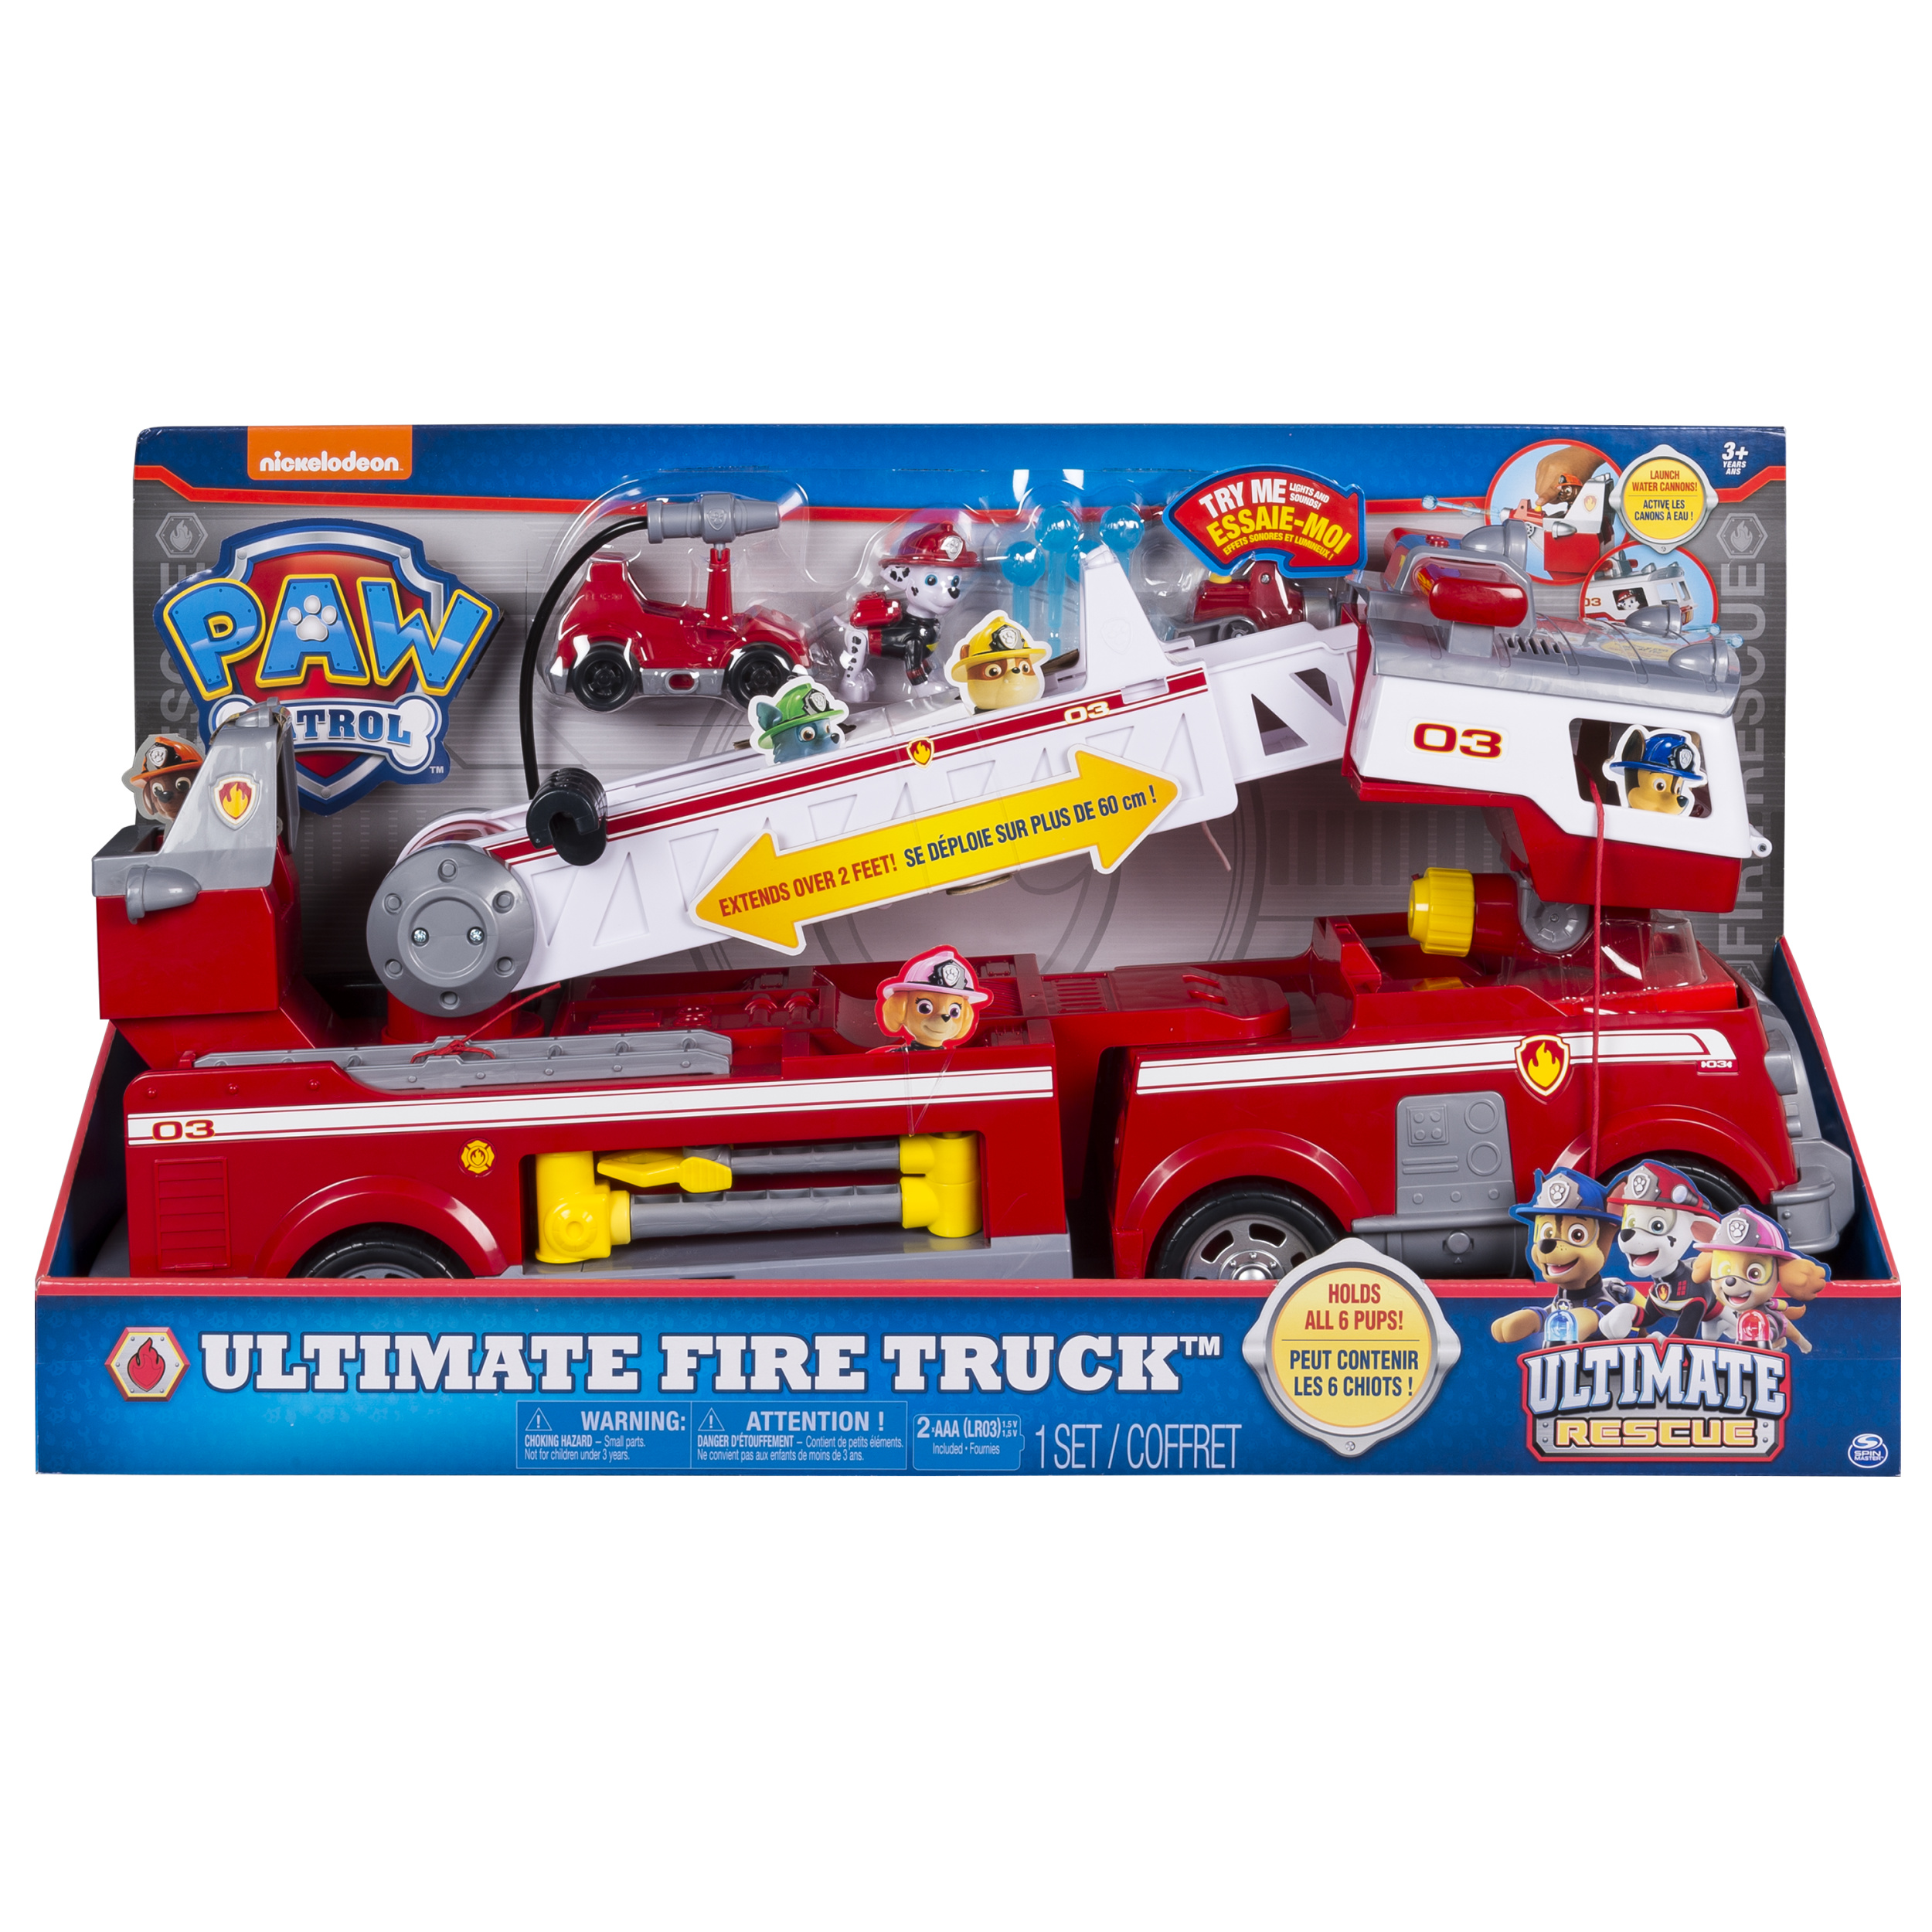 PAW Patrol Ultimate Rescue Fire Truck with Extendable 2 ft Tall Ladder for Age 